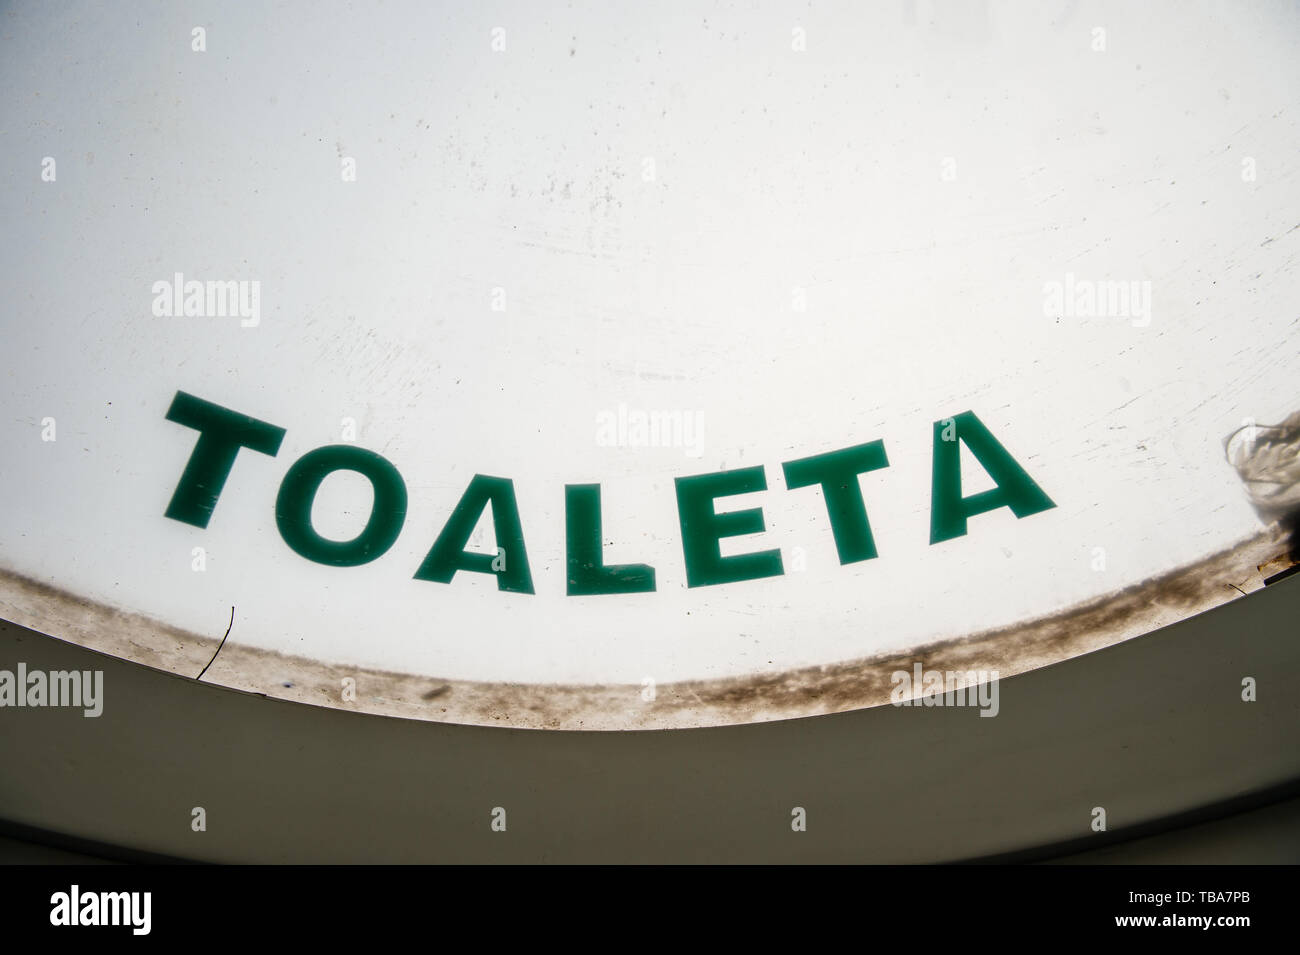 Toilet toaleta sign in Herestrau park in central Bucharest - sign to public WC Stock Photo